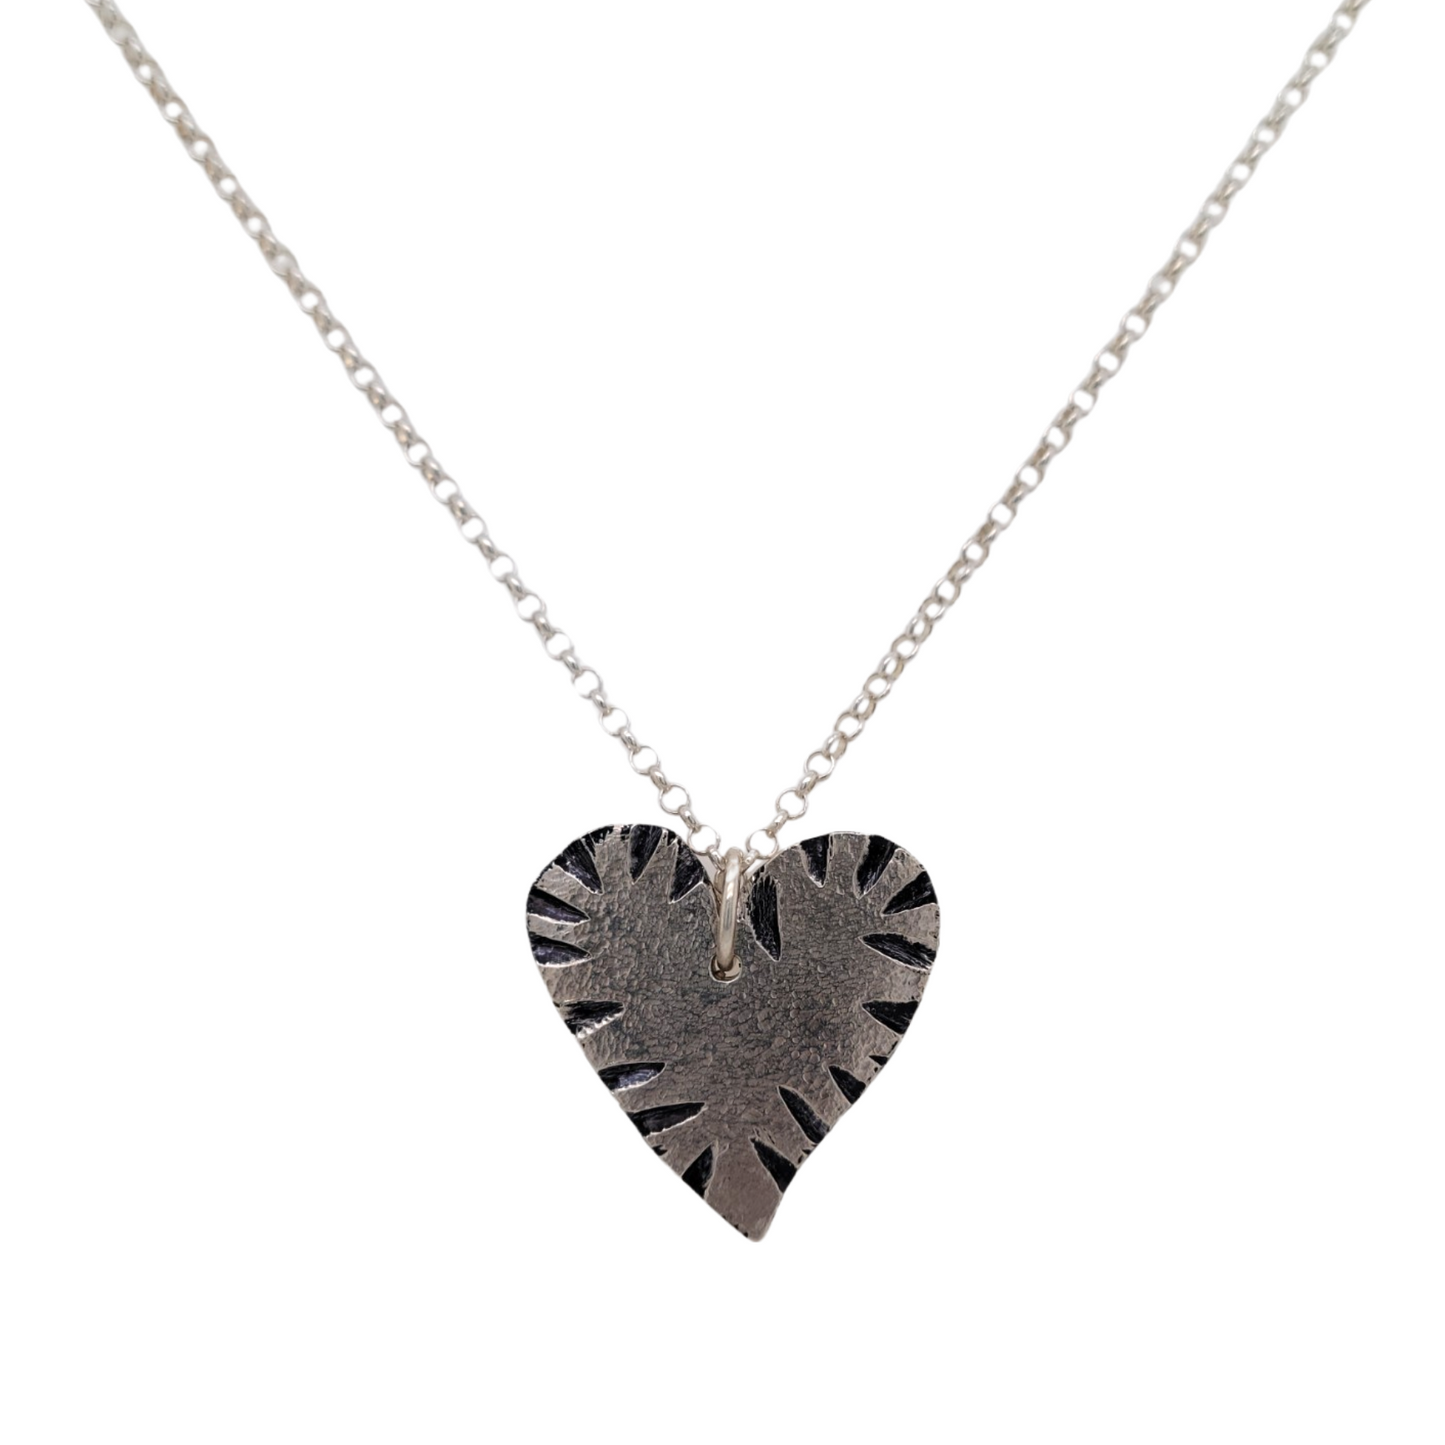 Emotion Heart Necklace